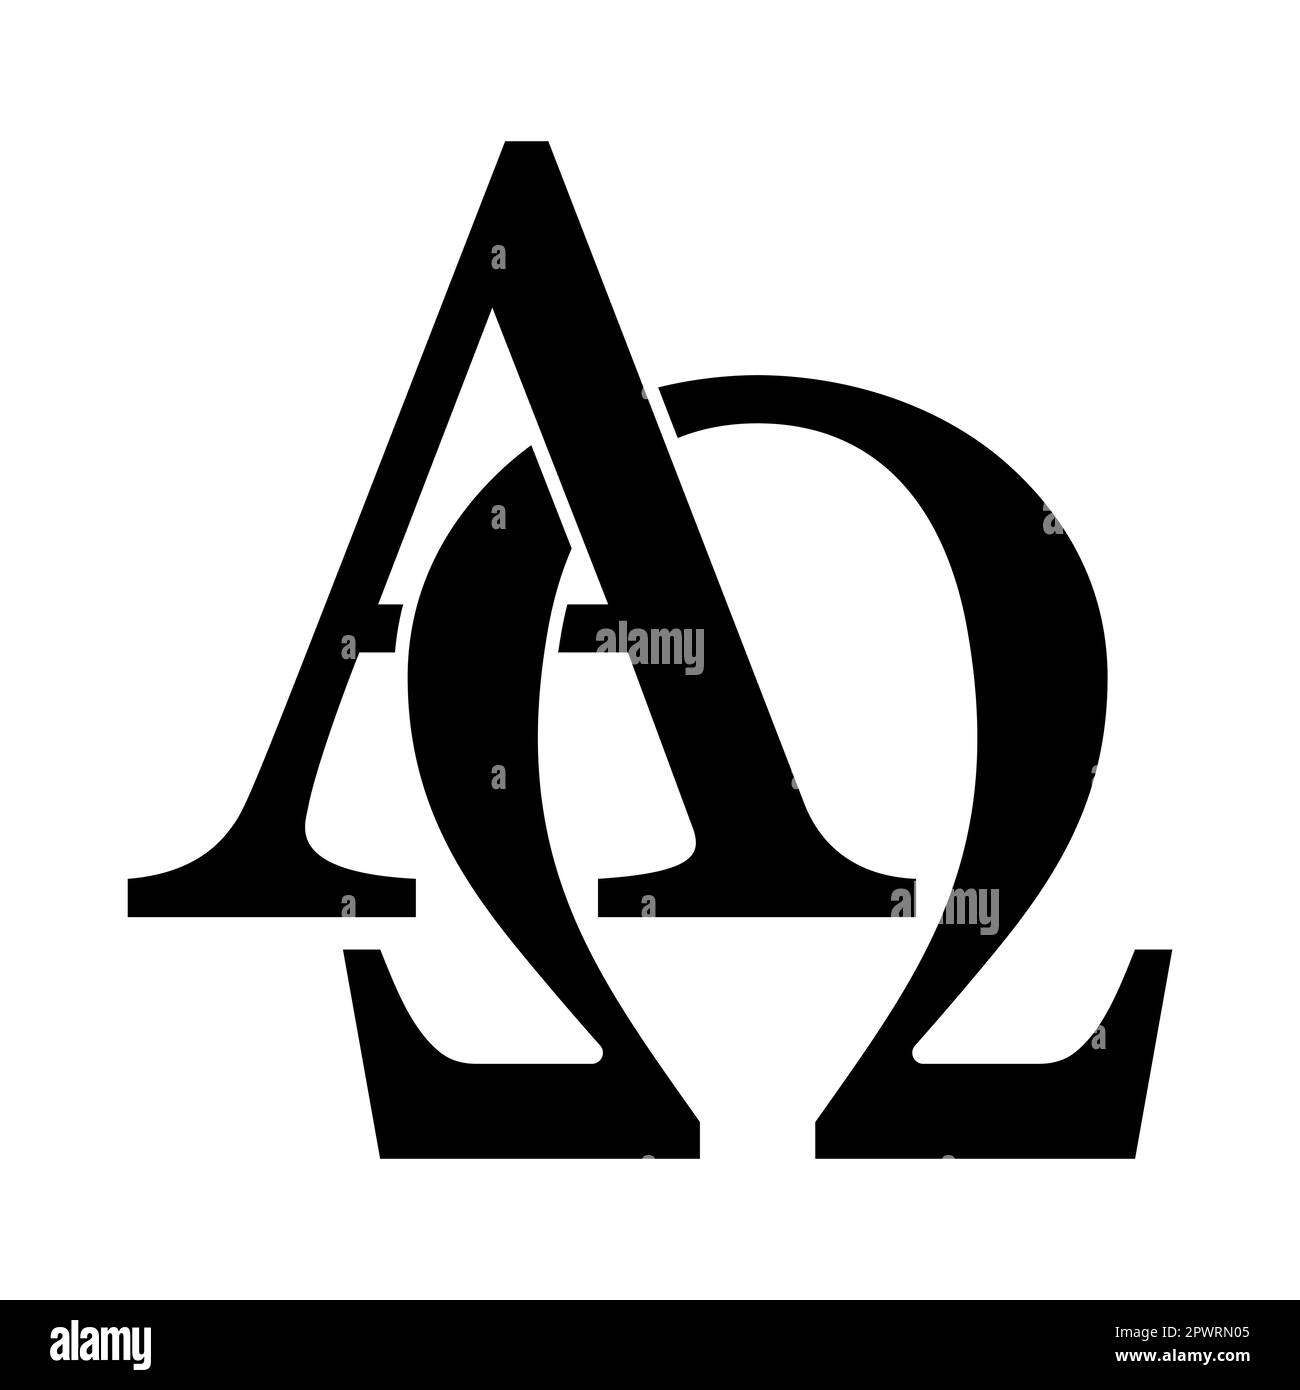 Interlaced Alpha and Omega, first and last letter in the classical Greek alphabet. Pair of letters, named in the Book of Revelation. Stock Photo